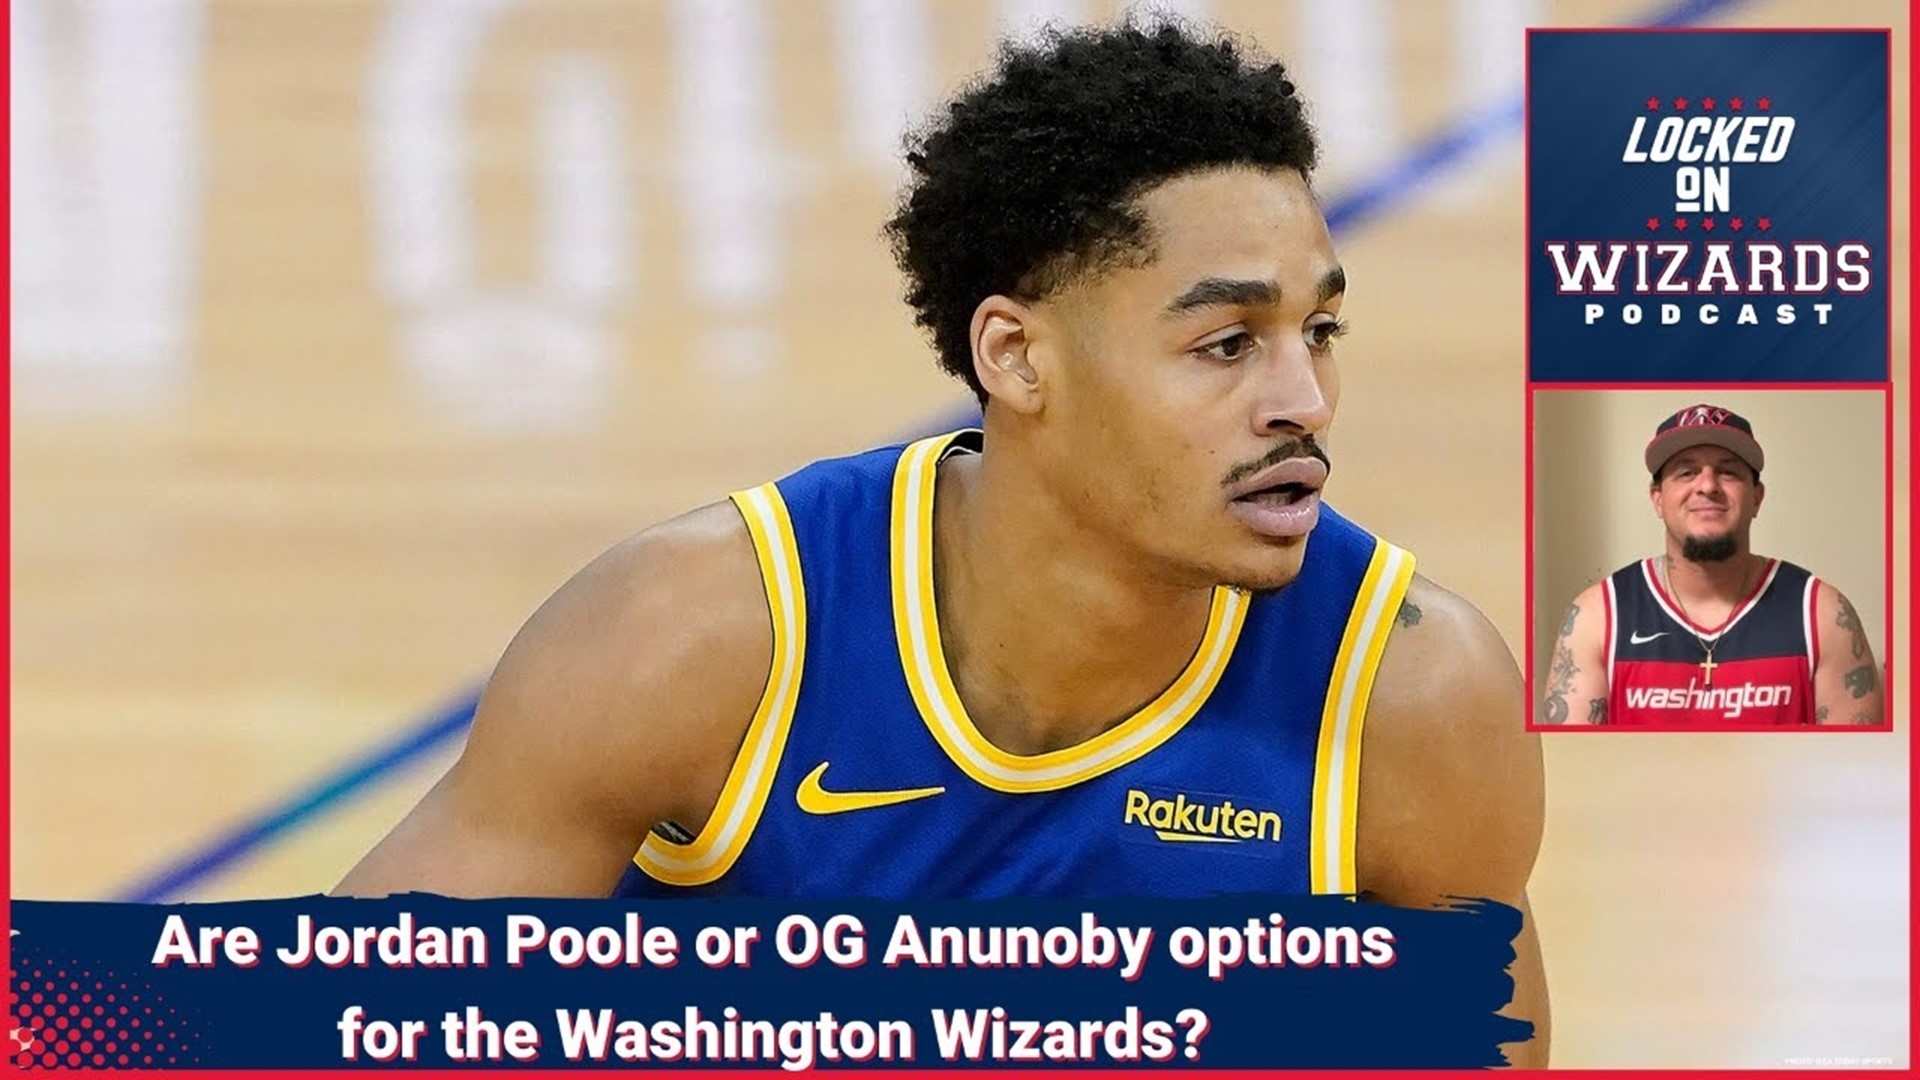 Brandon discusses whether Jordan Poole or OG Anunoby are legit trade targets for the Washington Wizards. He breaks down their season stats and contracts.